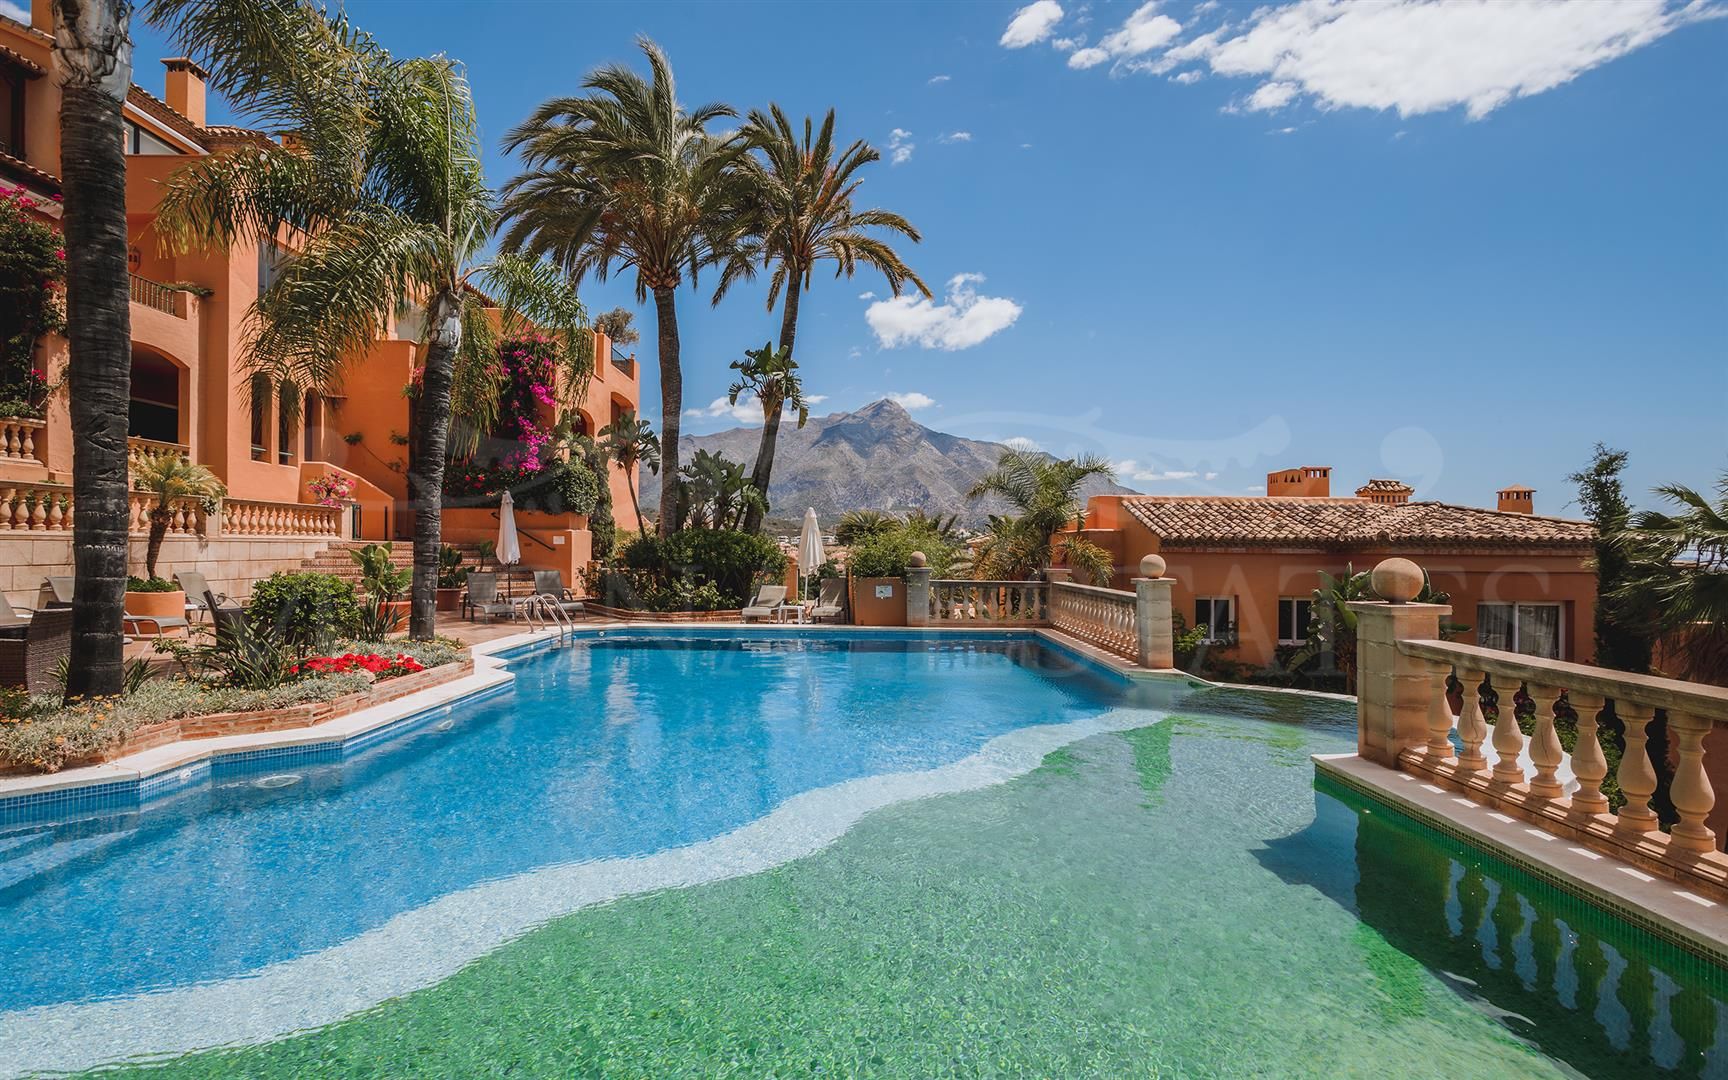 Duplex penthouse in Les Belvederes with open views to the sea, in Nueva Andalucia, Marbella